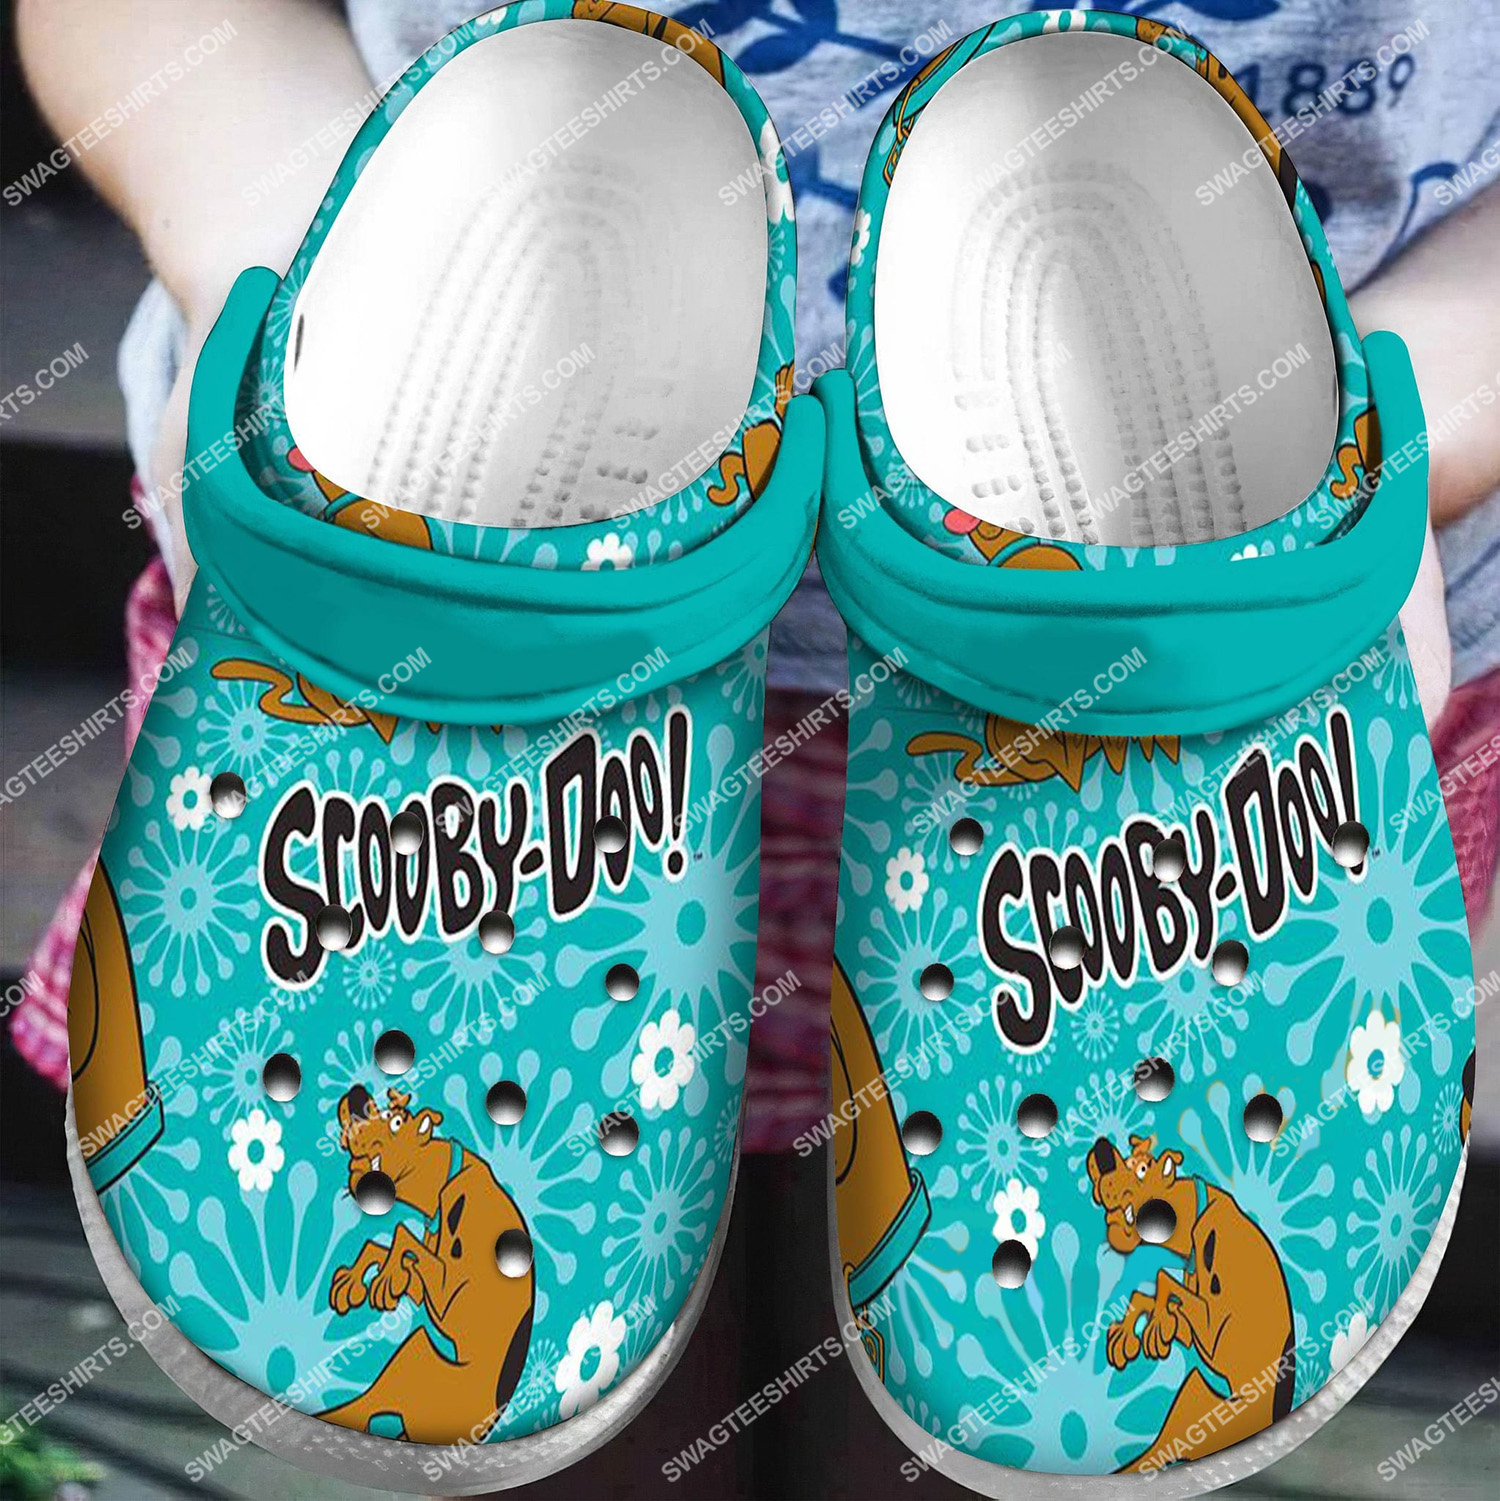 scooby-doo all over printed crocs 5(1)